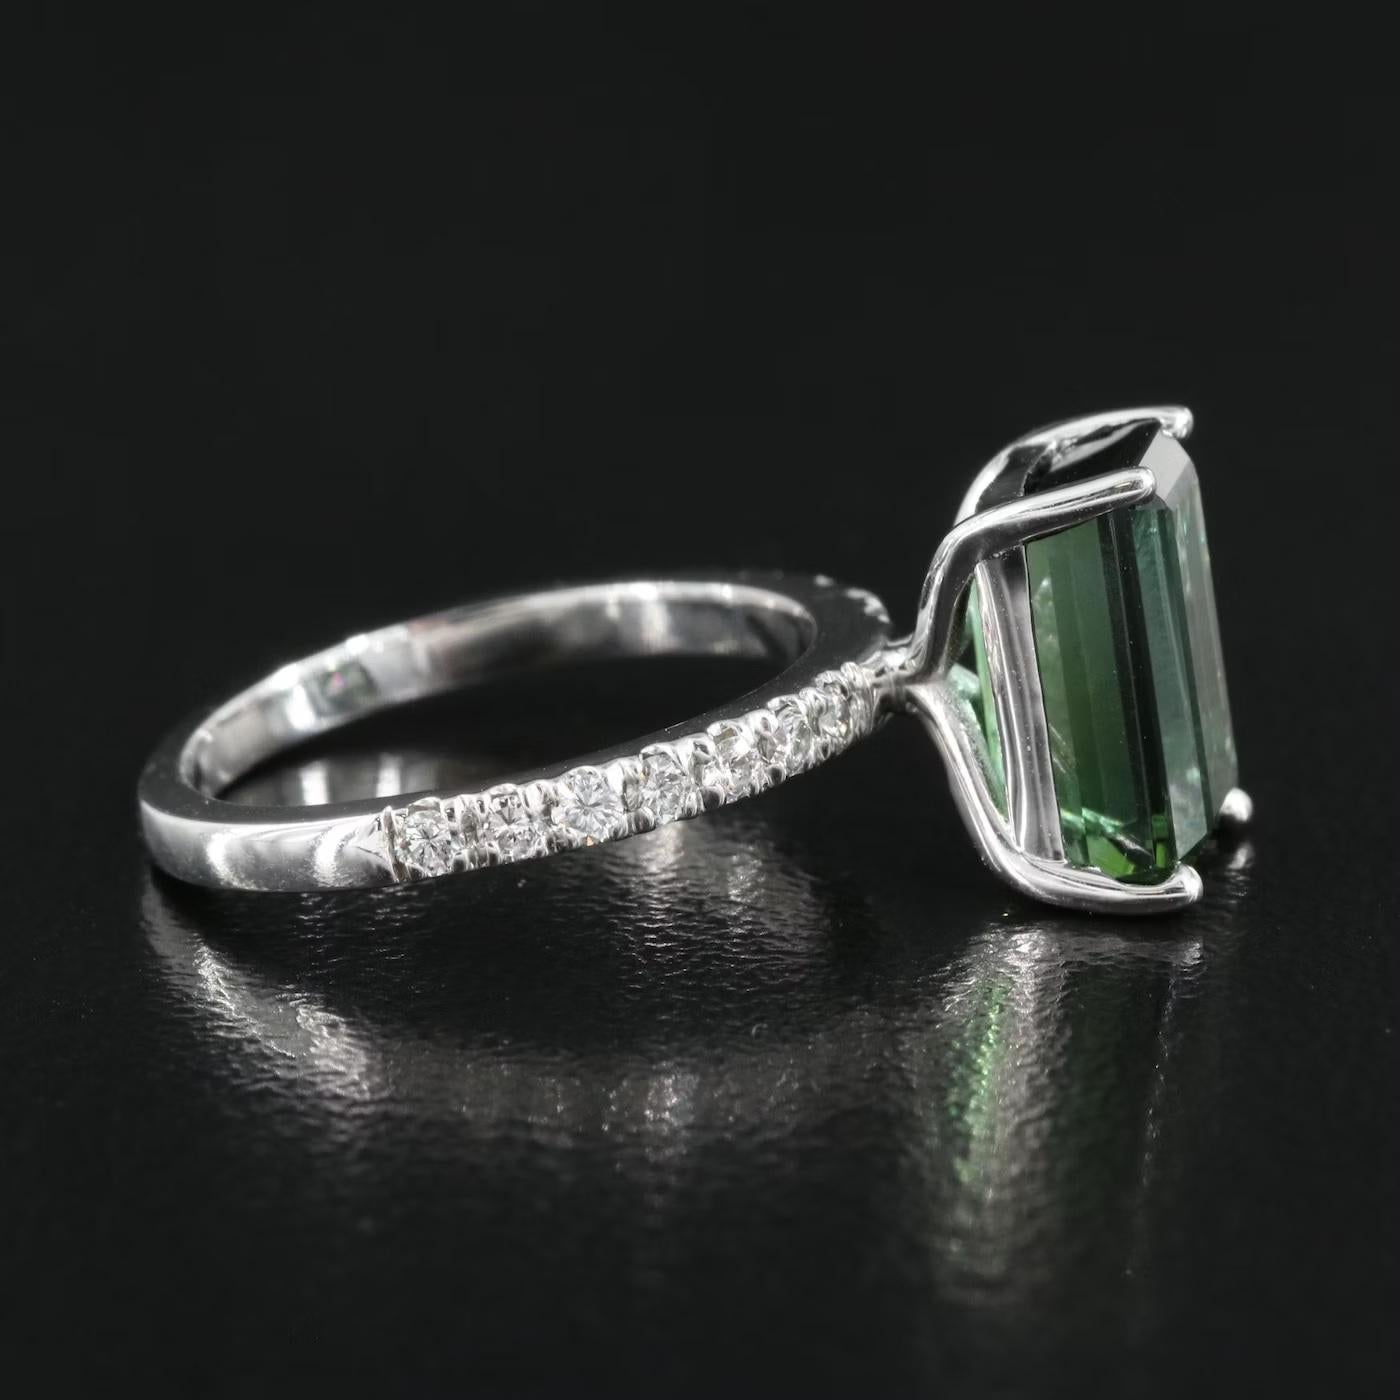 GIA certified, see attached GIA certificate

GIA Report #2223829139 Enclosed

NEW WITH TAGS, Tag Price $7500

GIA certified, 3.25 CT High quality Tourmaline 

0.28 CWT Diamond
         
14K white gold, stamped 14K

Head turner, statement piece.